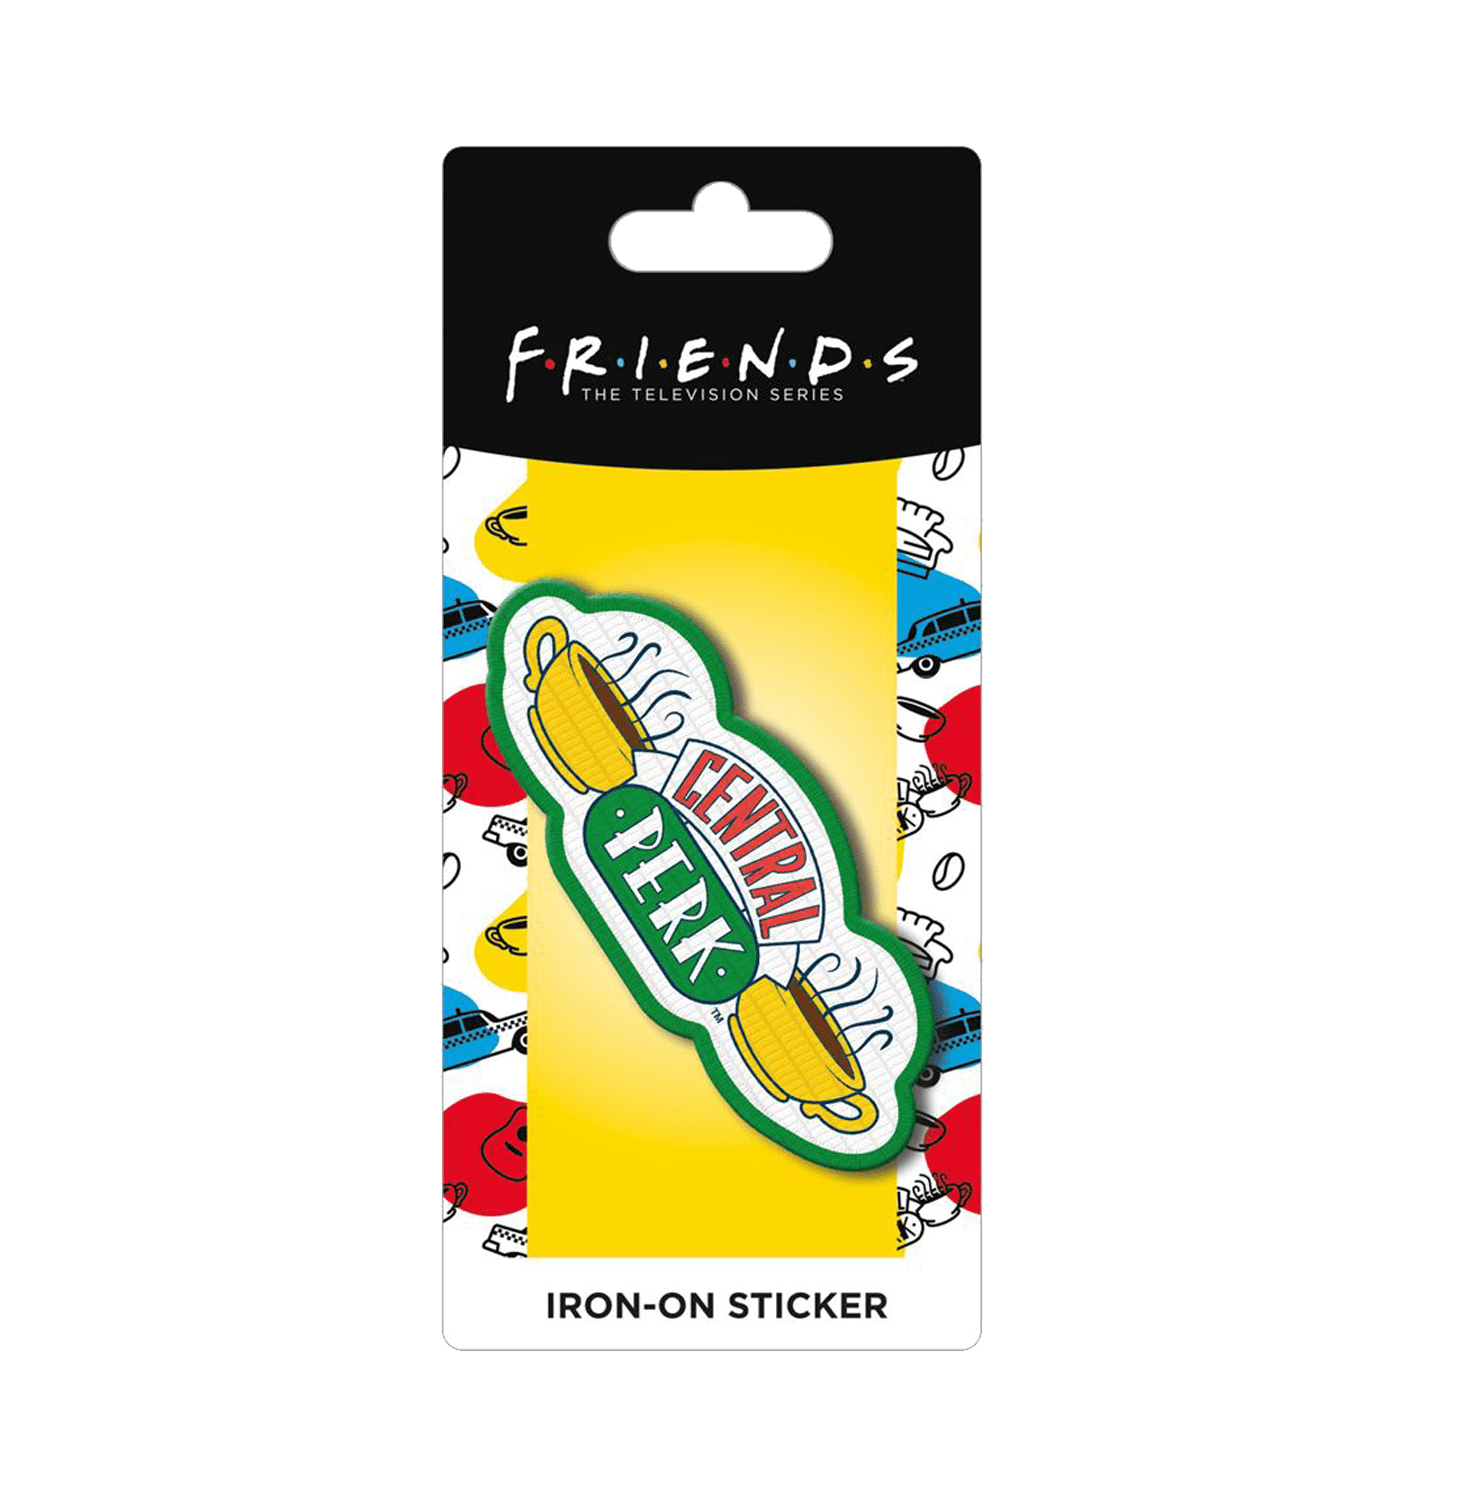 Entertainment Store  Buy FRIENDS Merchandise Gift Products Online —  www.